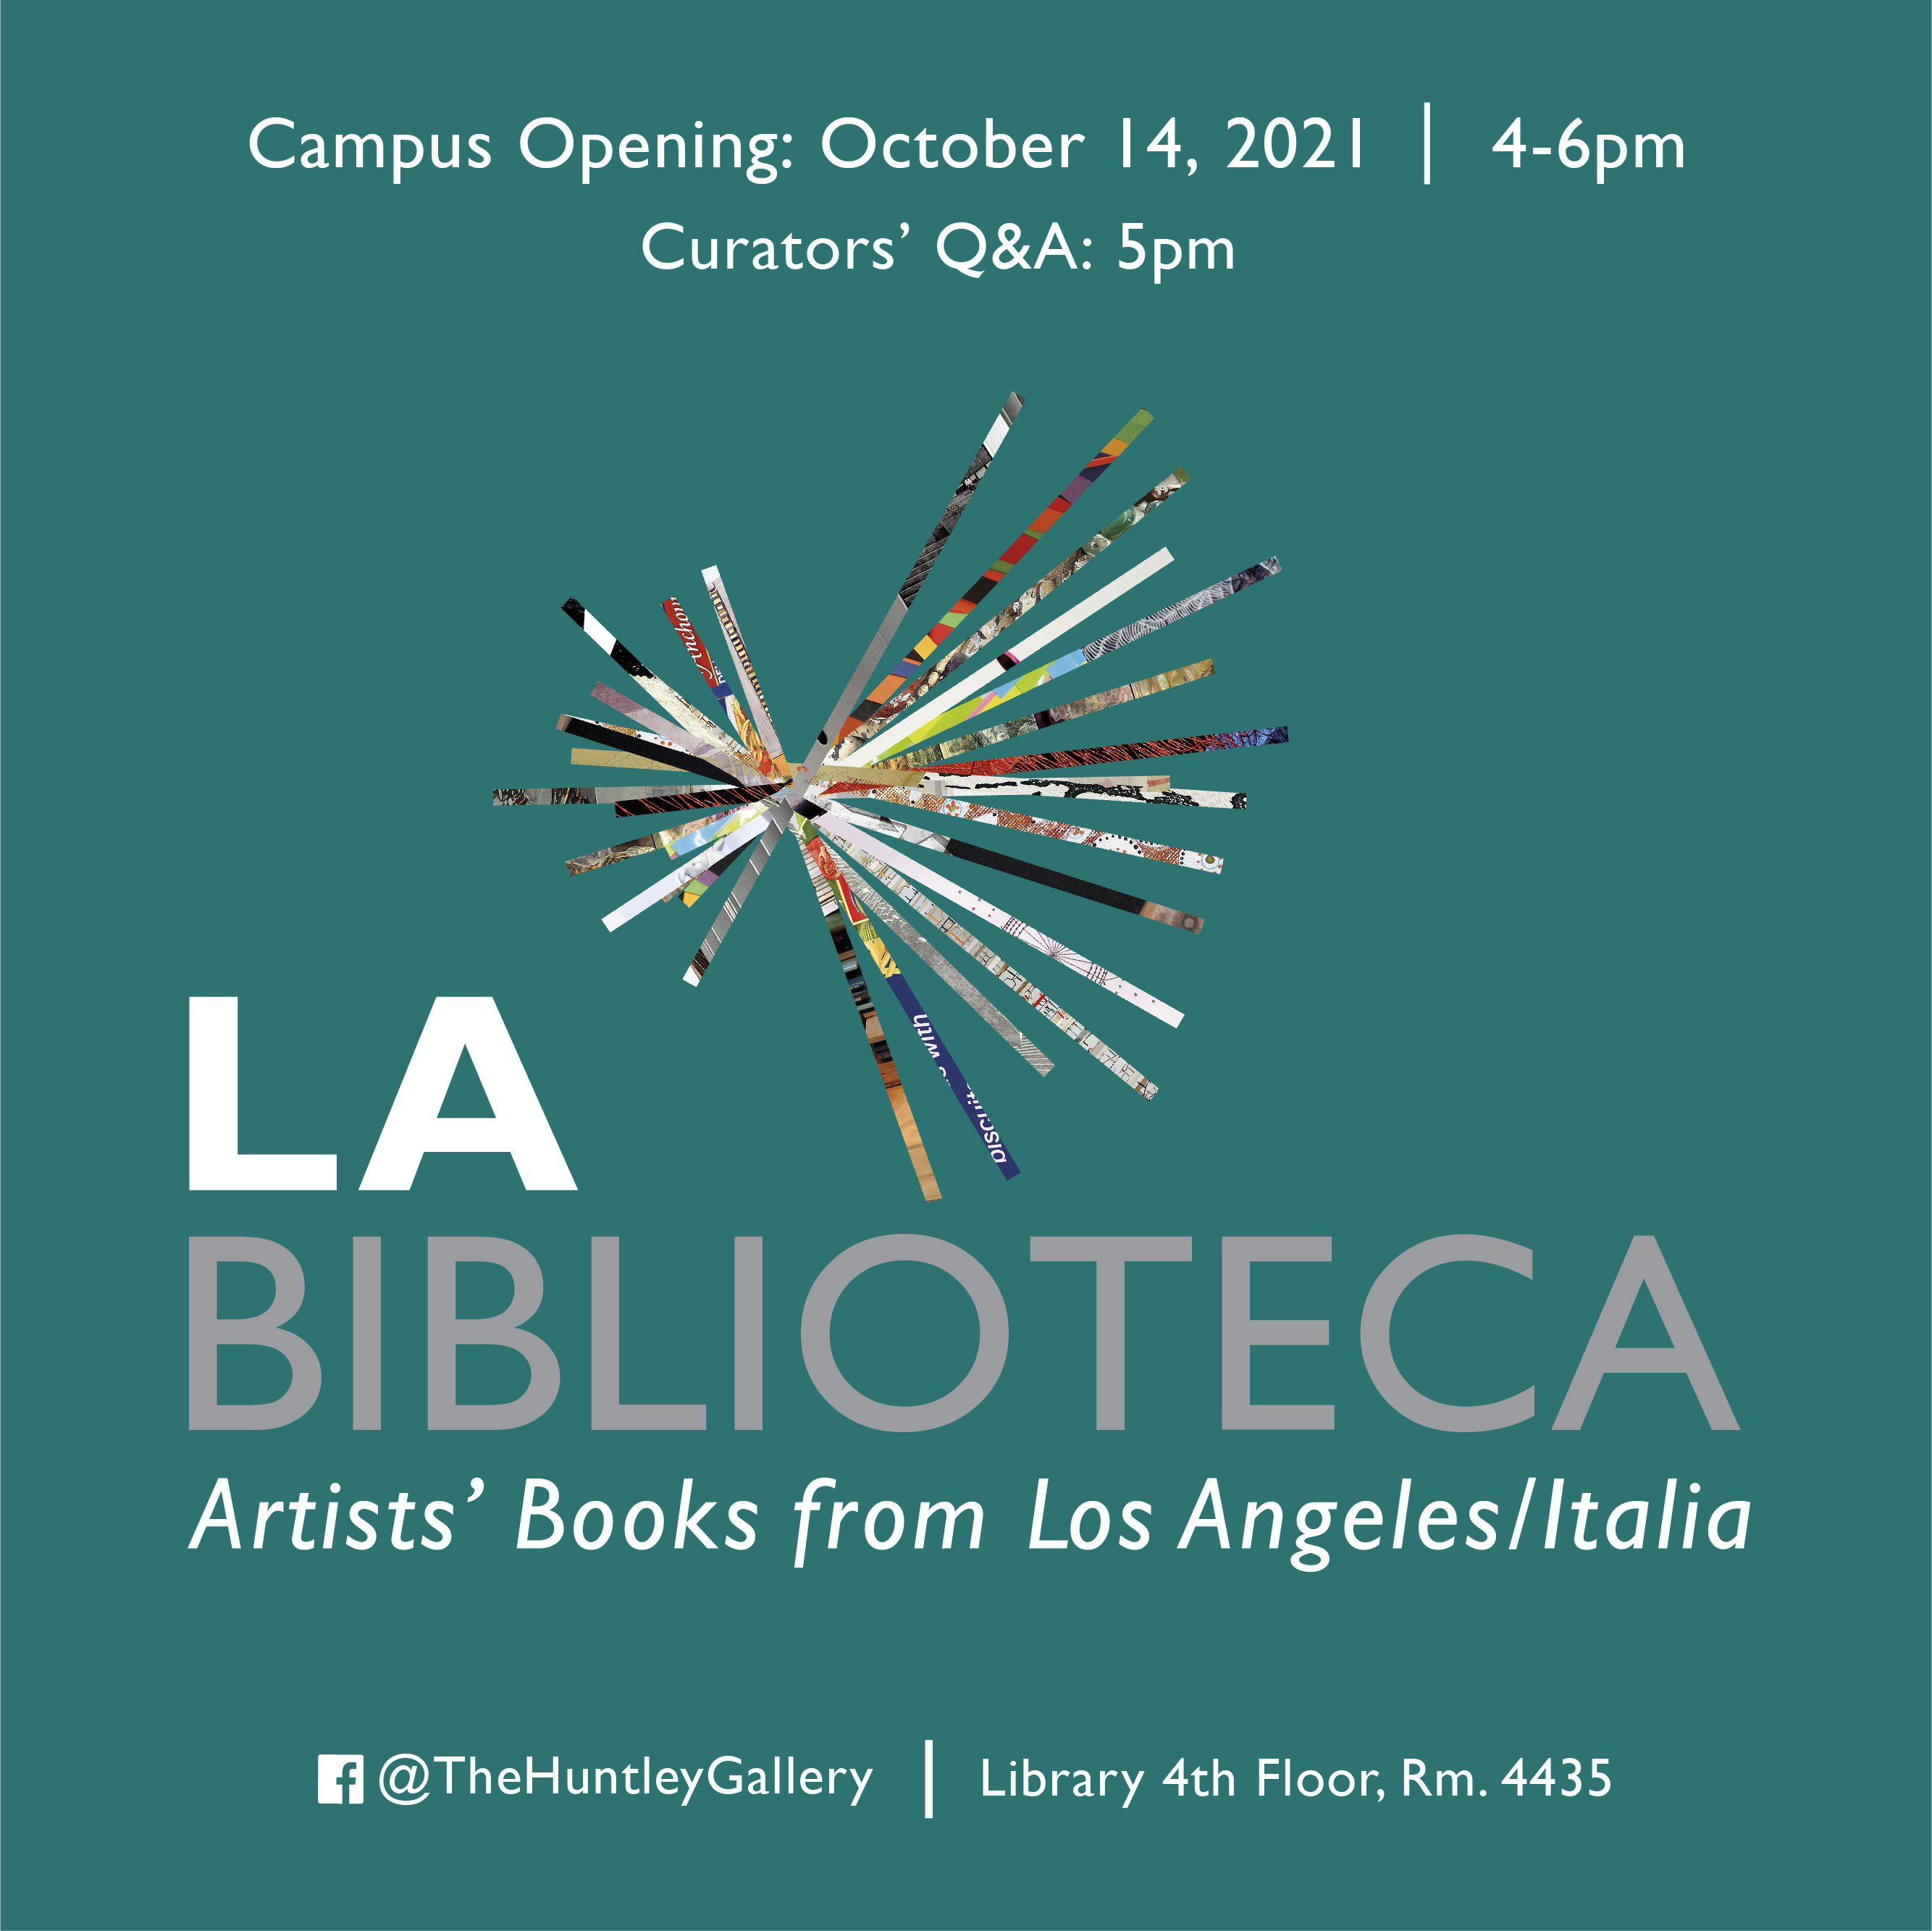 Thursday, October 14th, 4-6pm LA Biblioteca: Artists' Books from Los Angeles/Italia Opening LA Biblioteca: Artists' Books from Los Angeles/Italia is opening on Thursday, October 14th! The Huntley Gallery will be open from 4-6 pm, with a Q & A at 5 pm! The weekend opening will be on Sunday, October 17th! The gallery will be open from 2-4 pm, with the Q & A at 3 pm!